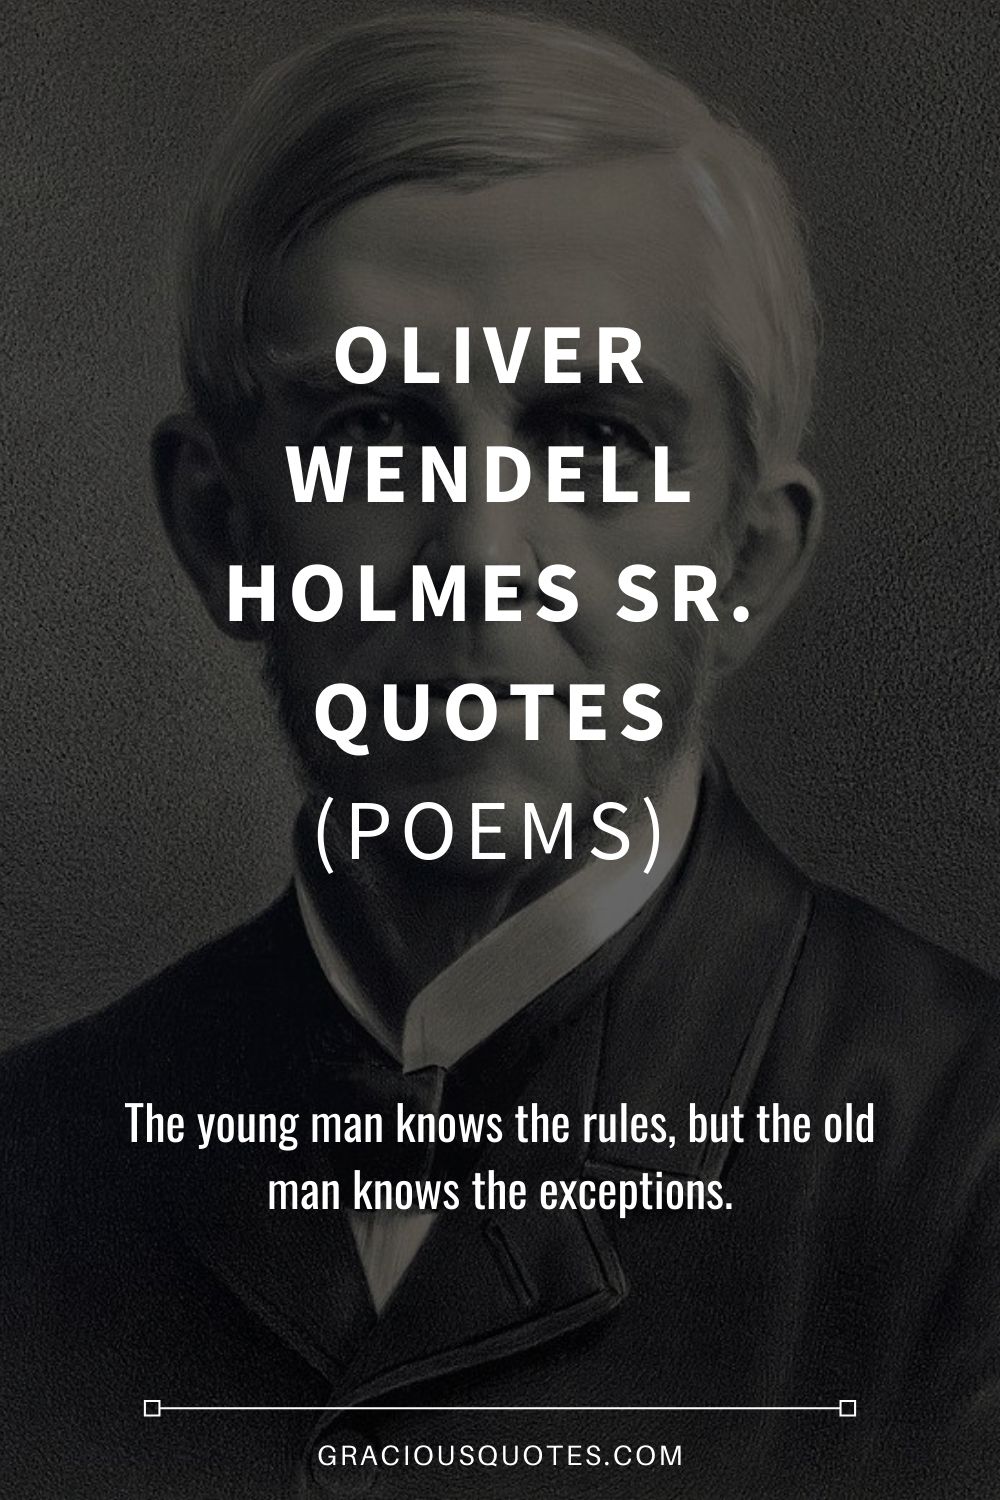 Oliver Wendell Holmes Sr. Quotes (POEMS) - Gracious Quotes